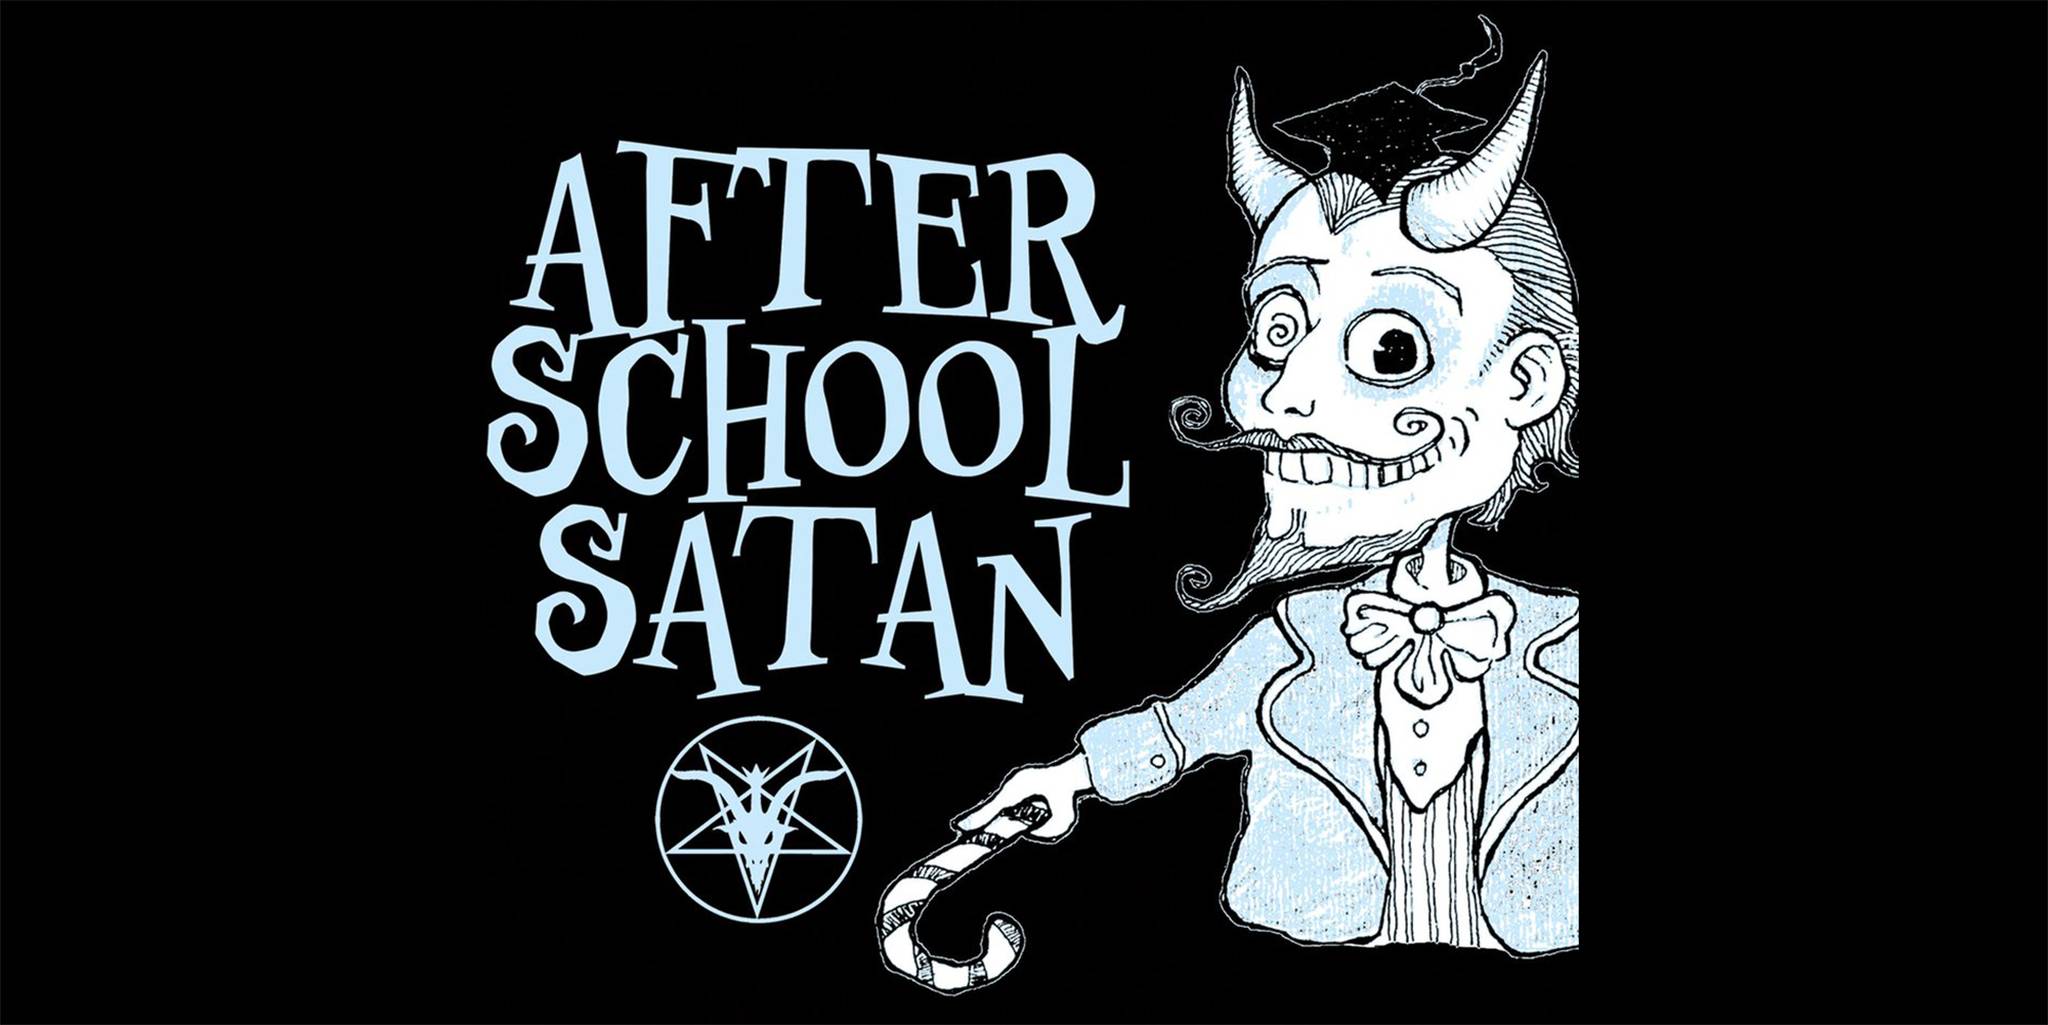 After School Satan Clubs coming to a school near you